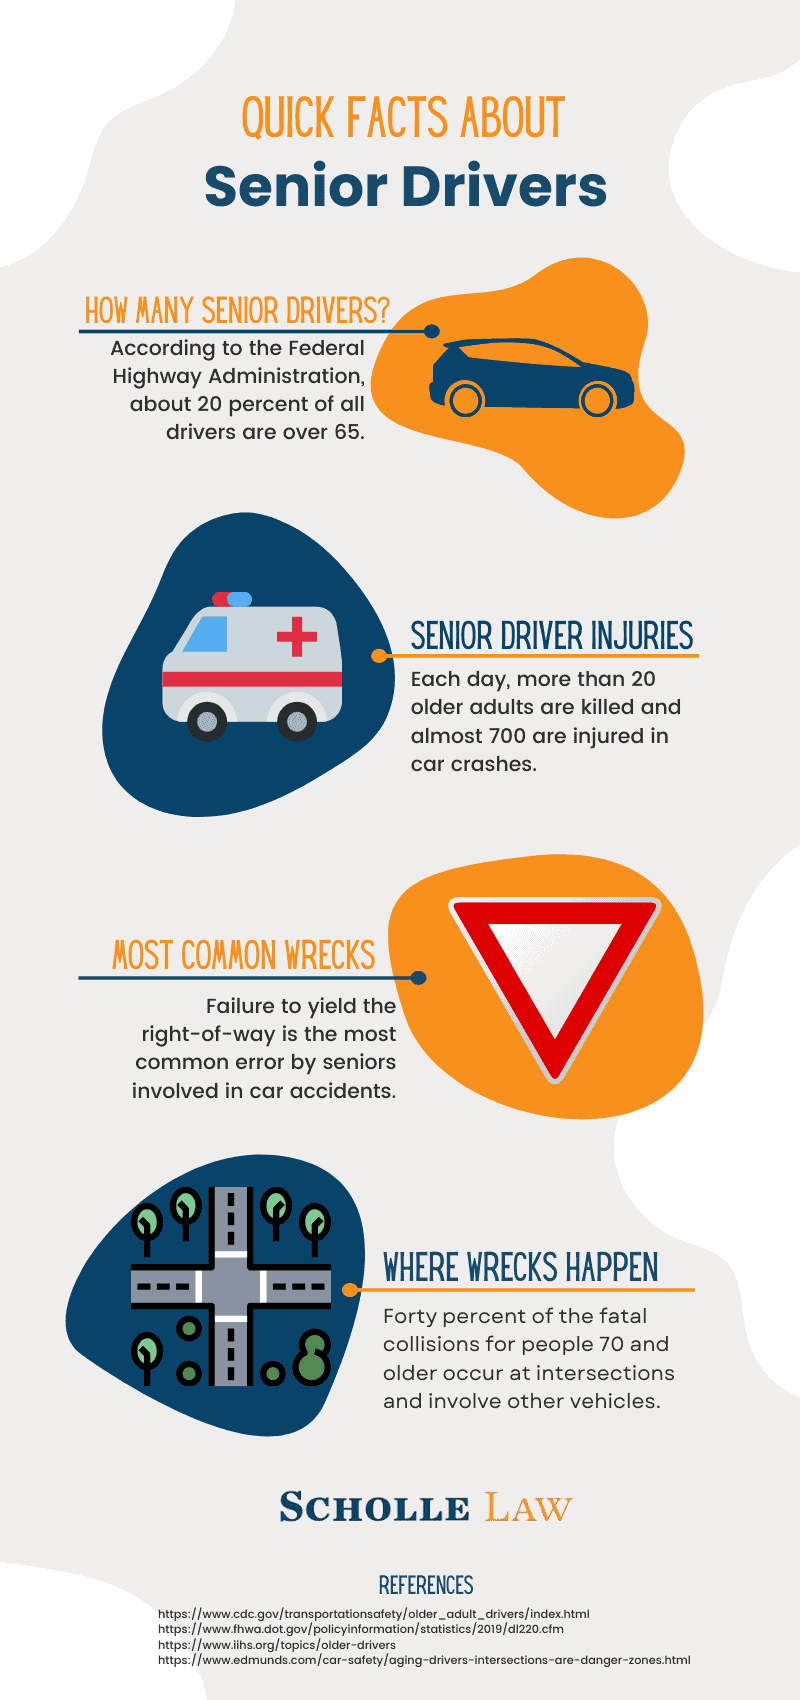 Quick Facts About Senior Drivers infographic